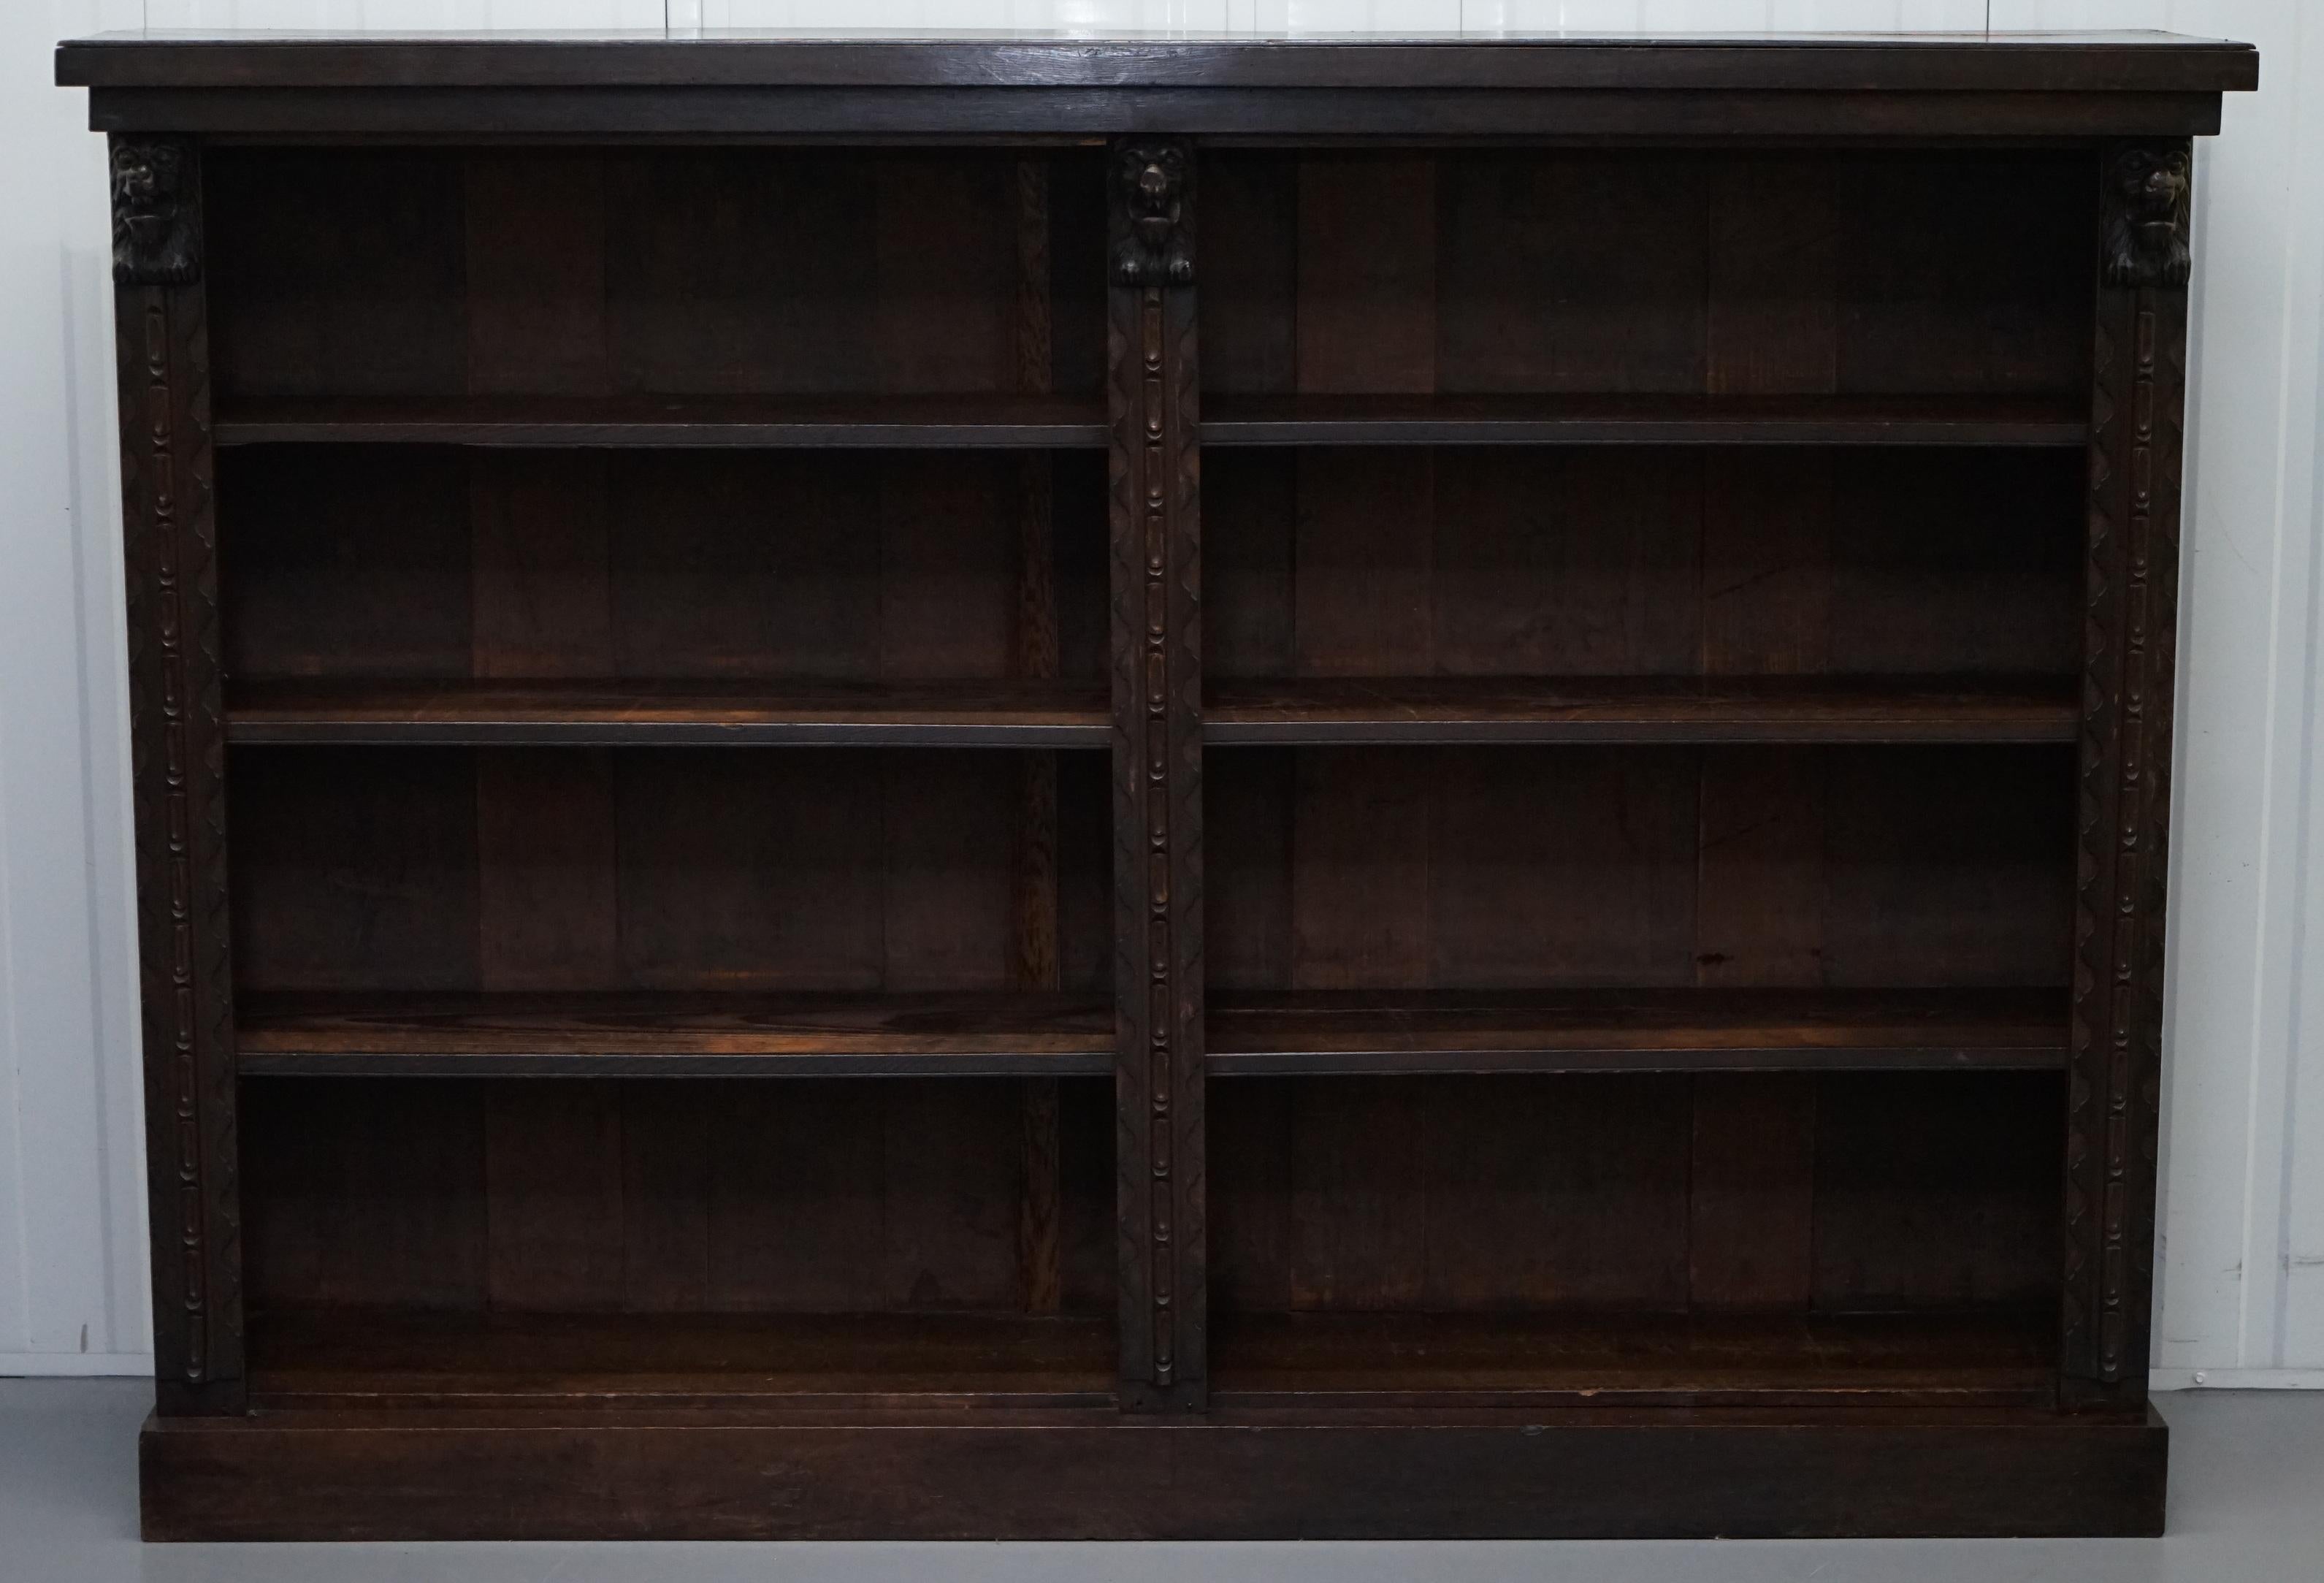 We are delighted to offer for sale this stunning large solid English oak carved bookcase with Lions heads

A good looking well made and decorative piece, there are three Lions heads, the shelves are removable, this is a good solid decorative piece